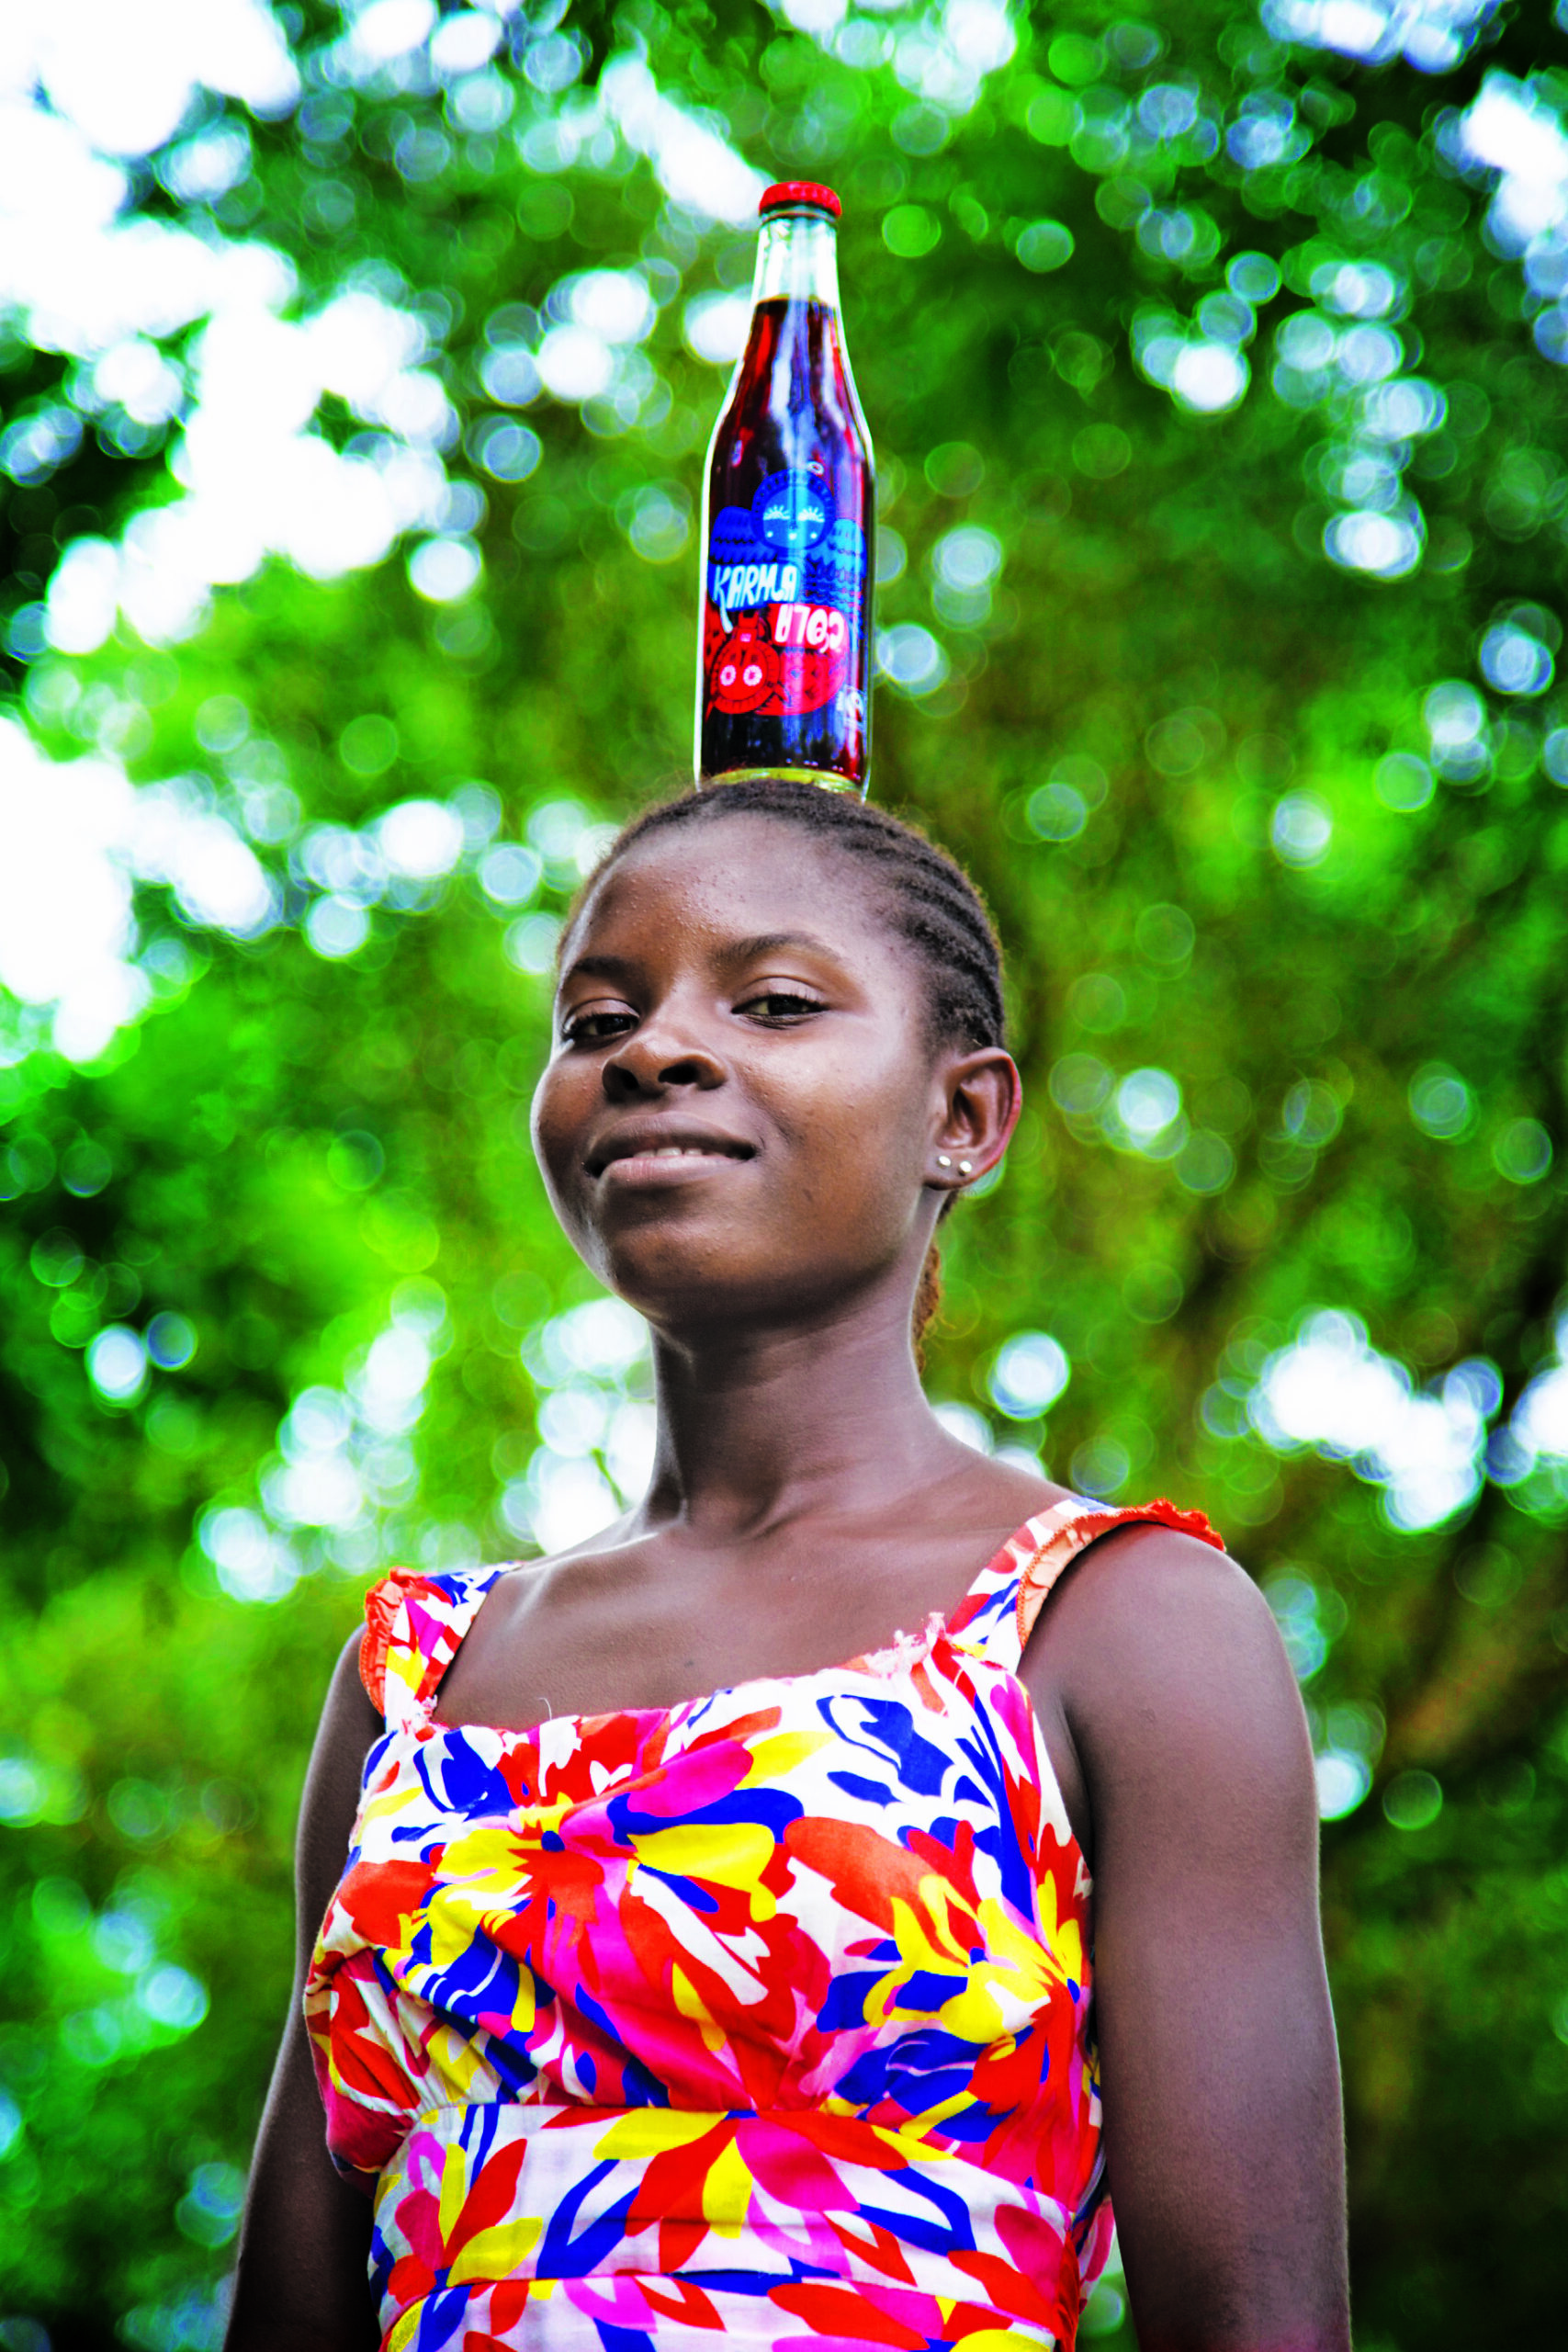 Image of girl standing smiling with bottle of Karma Cola balancing on her head